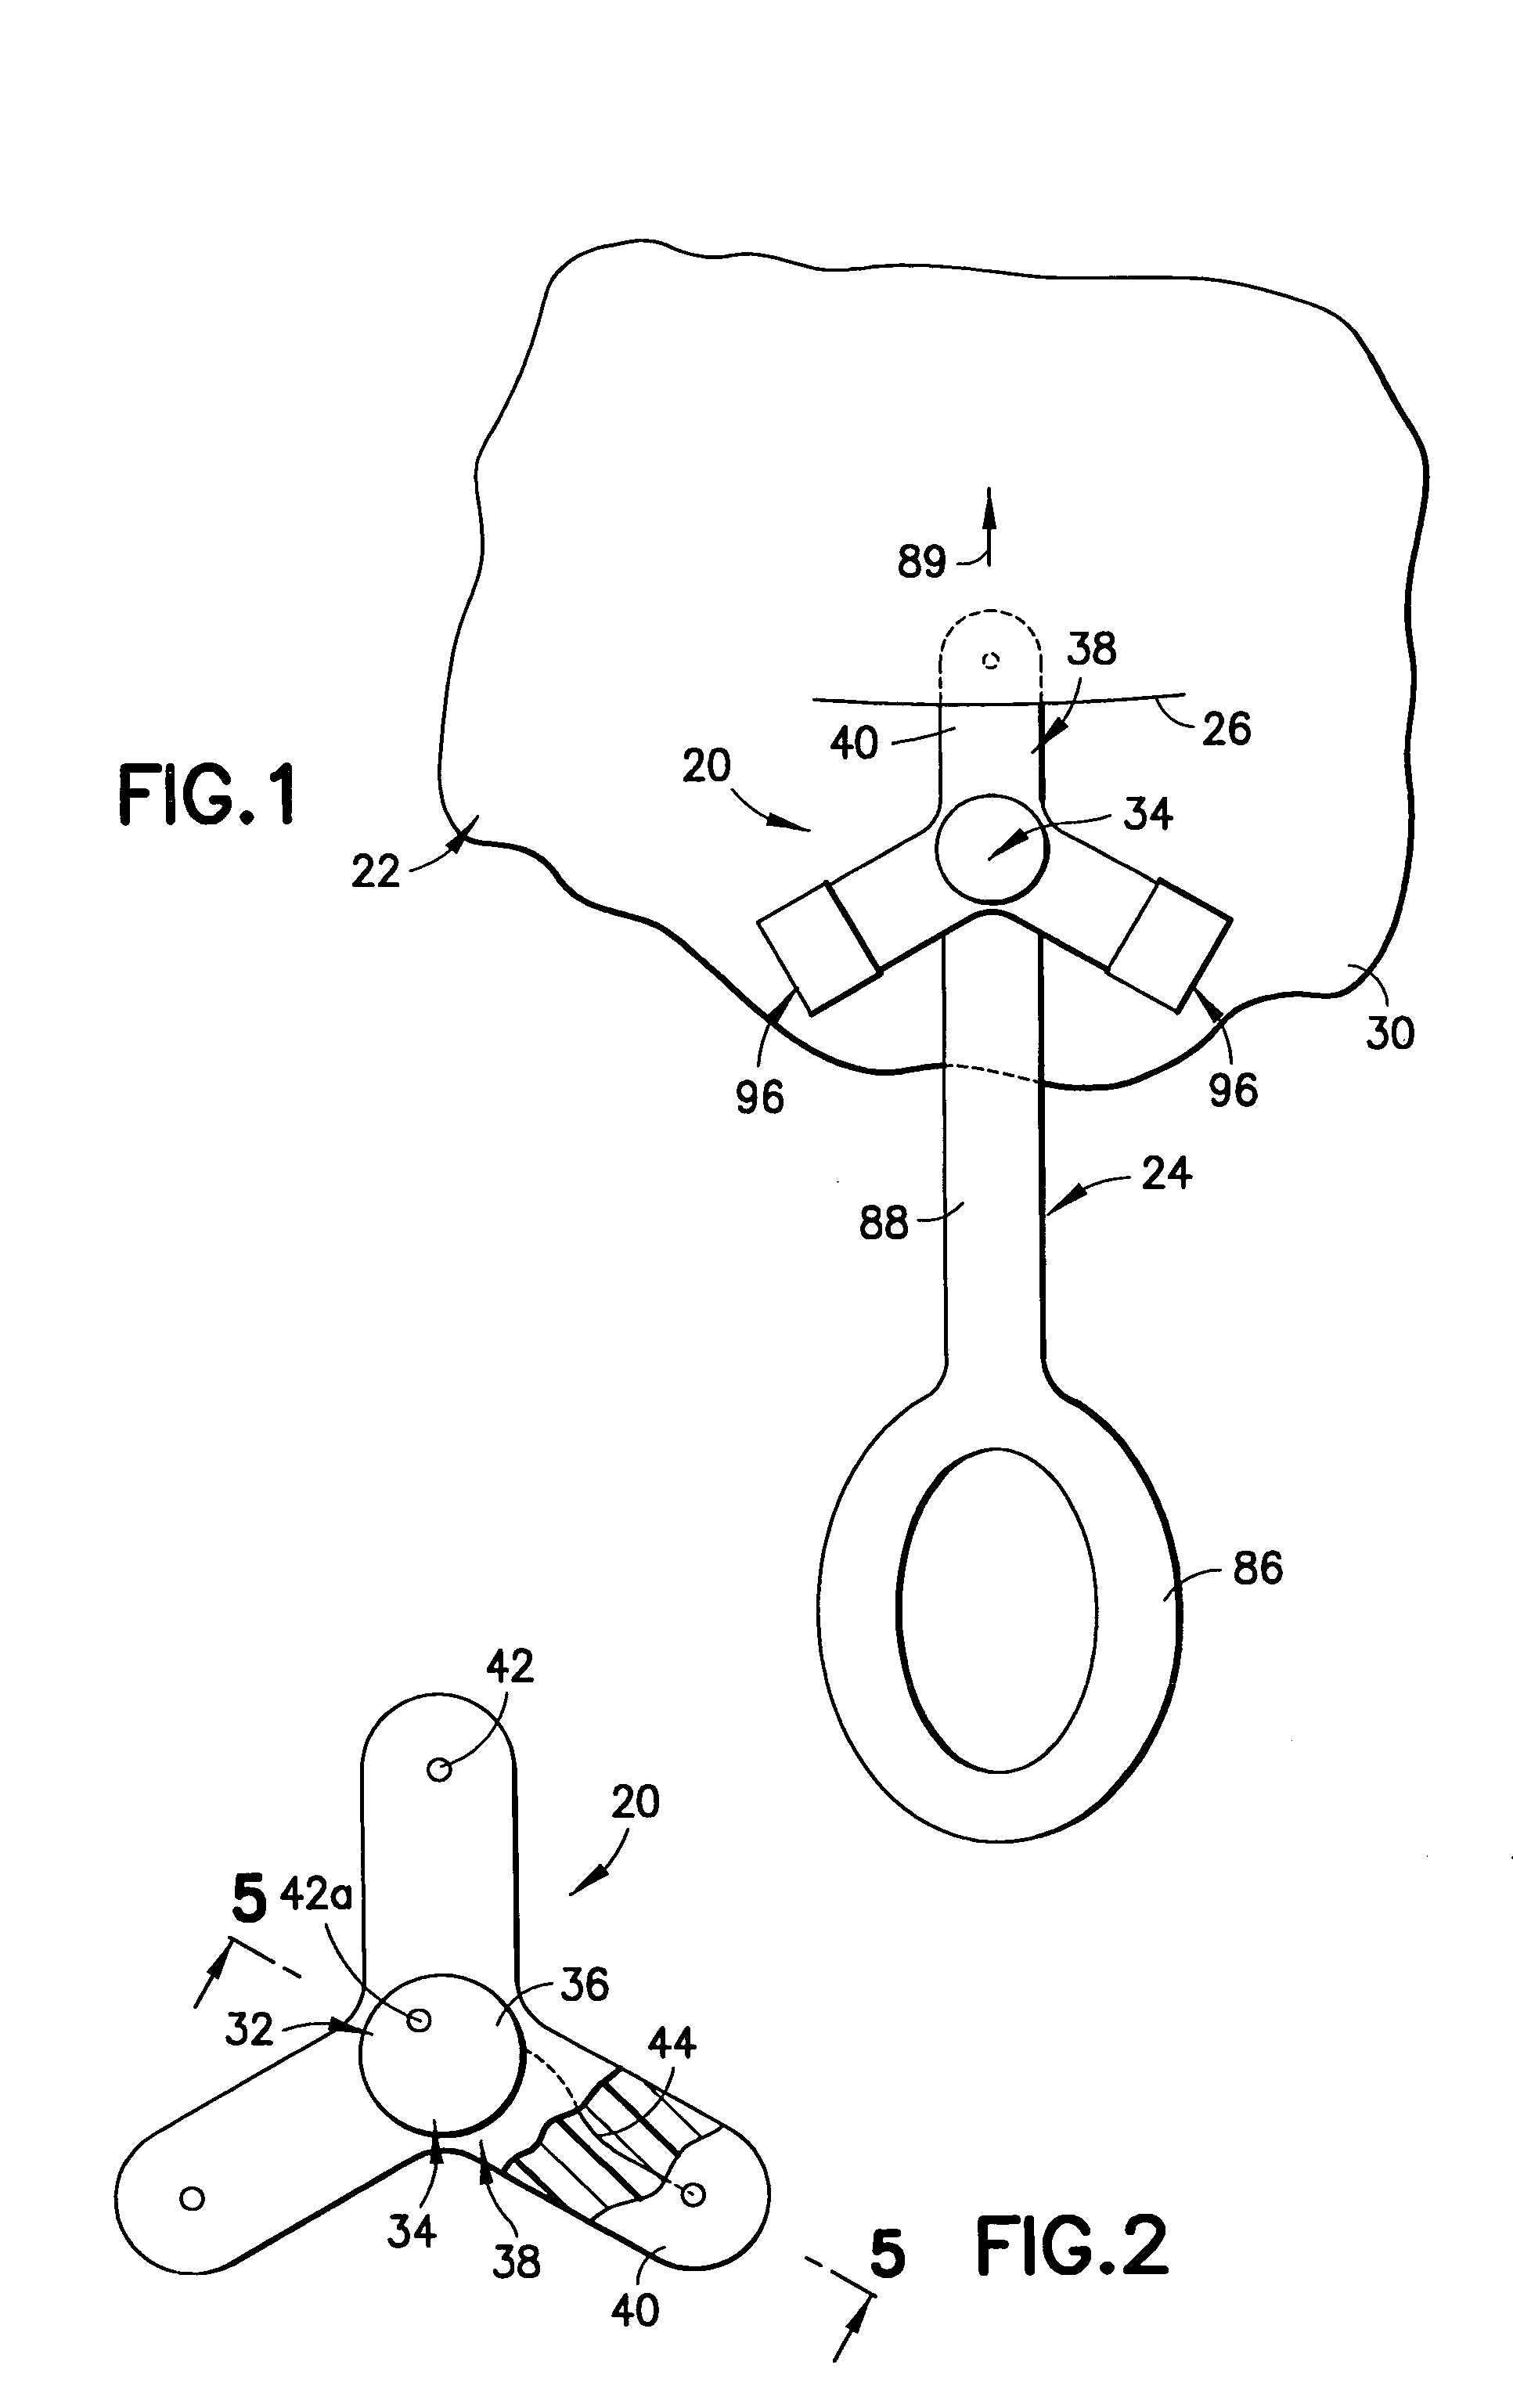 Implantable leadless cardiac device with flexible flaps for sensing